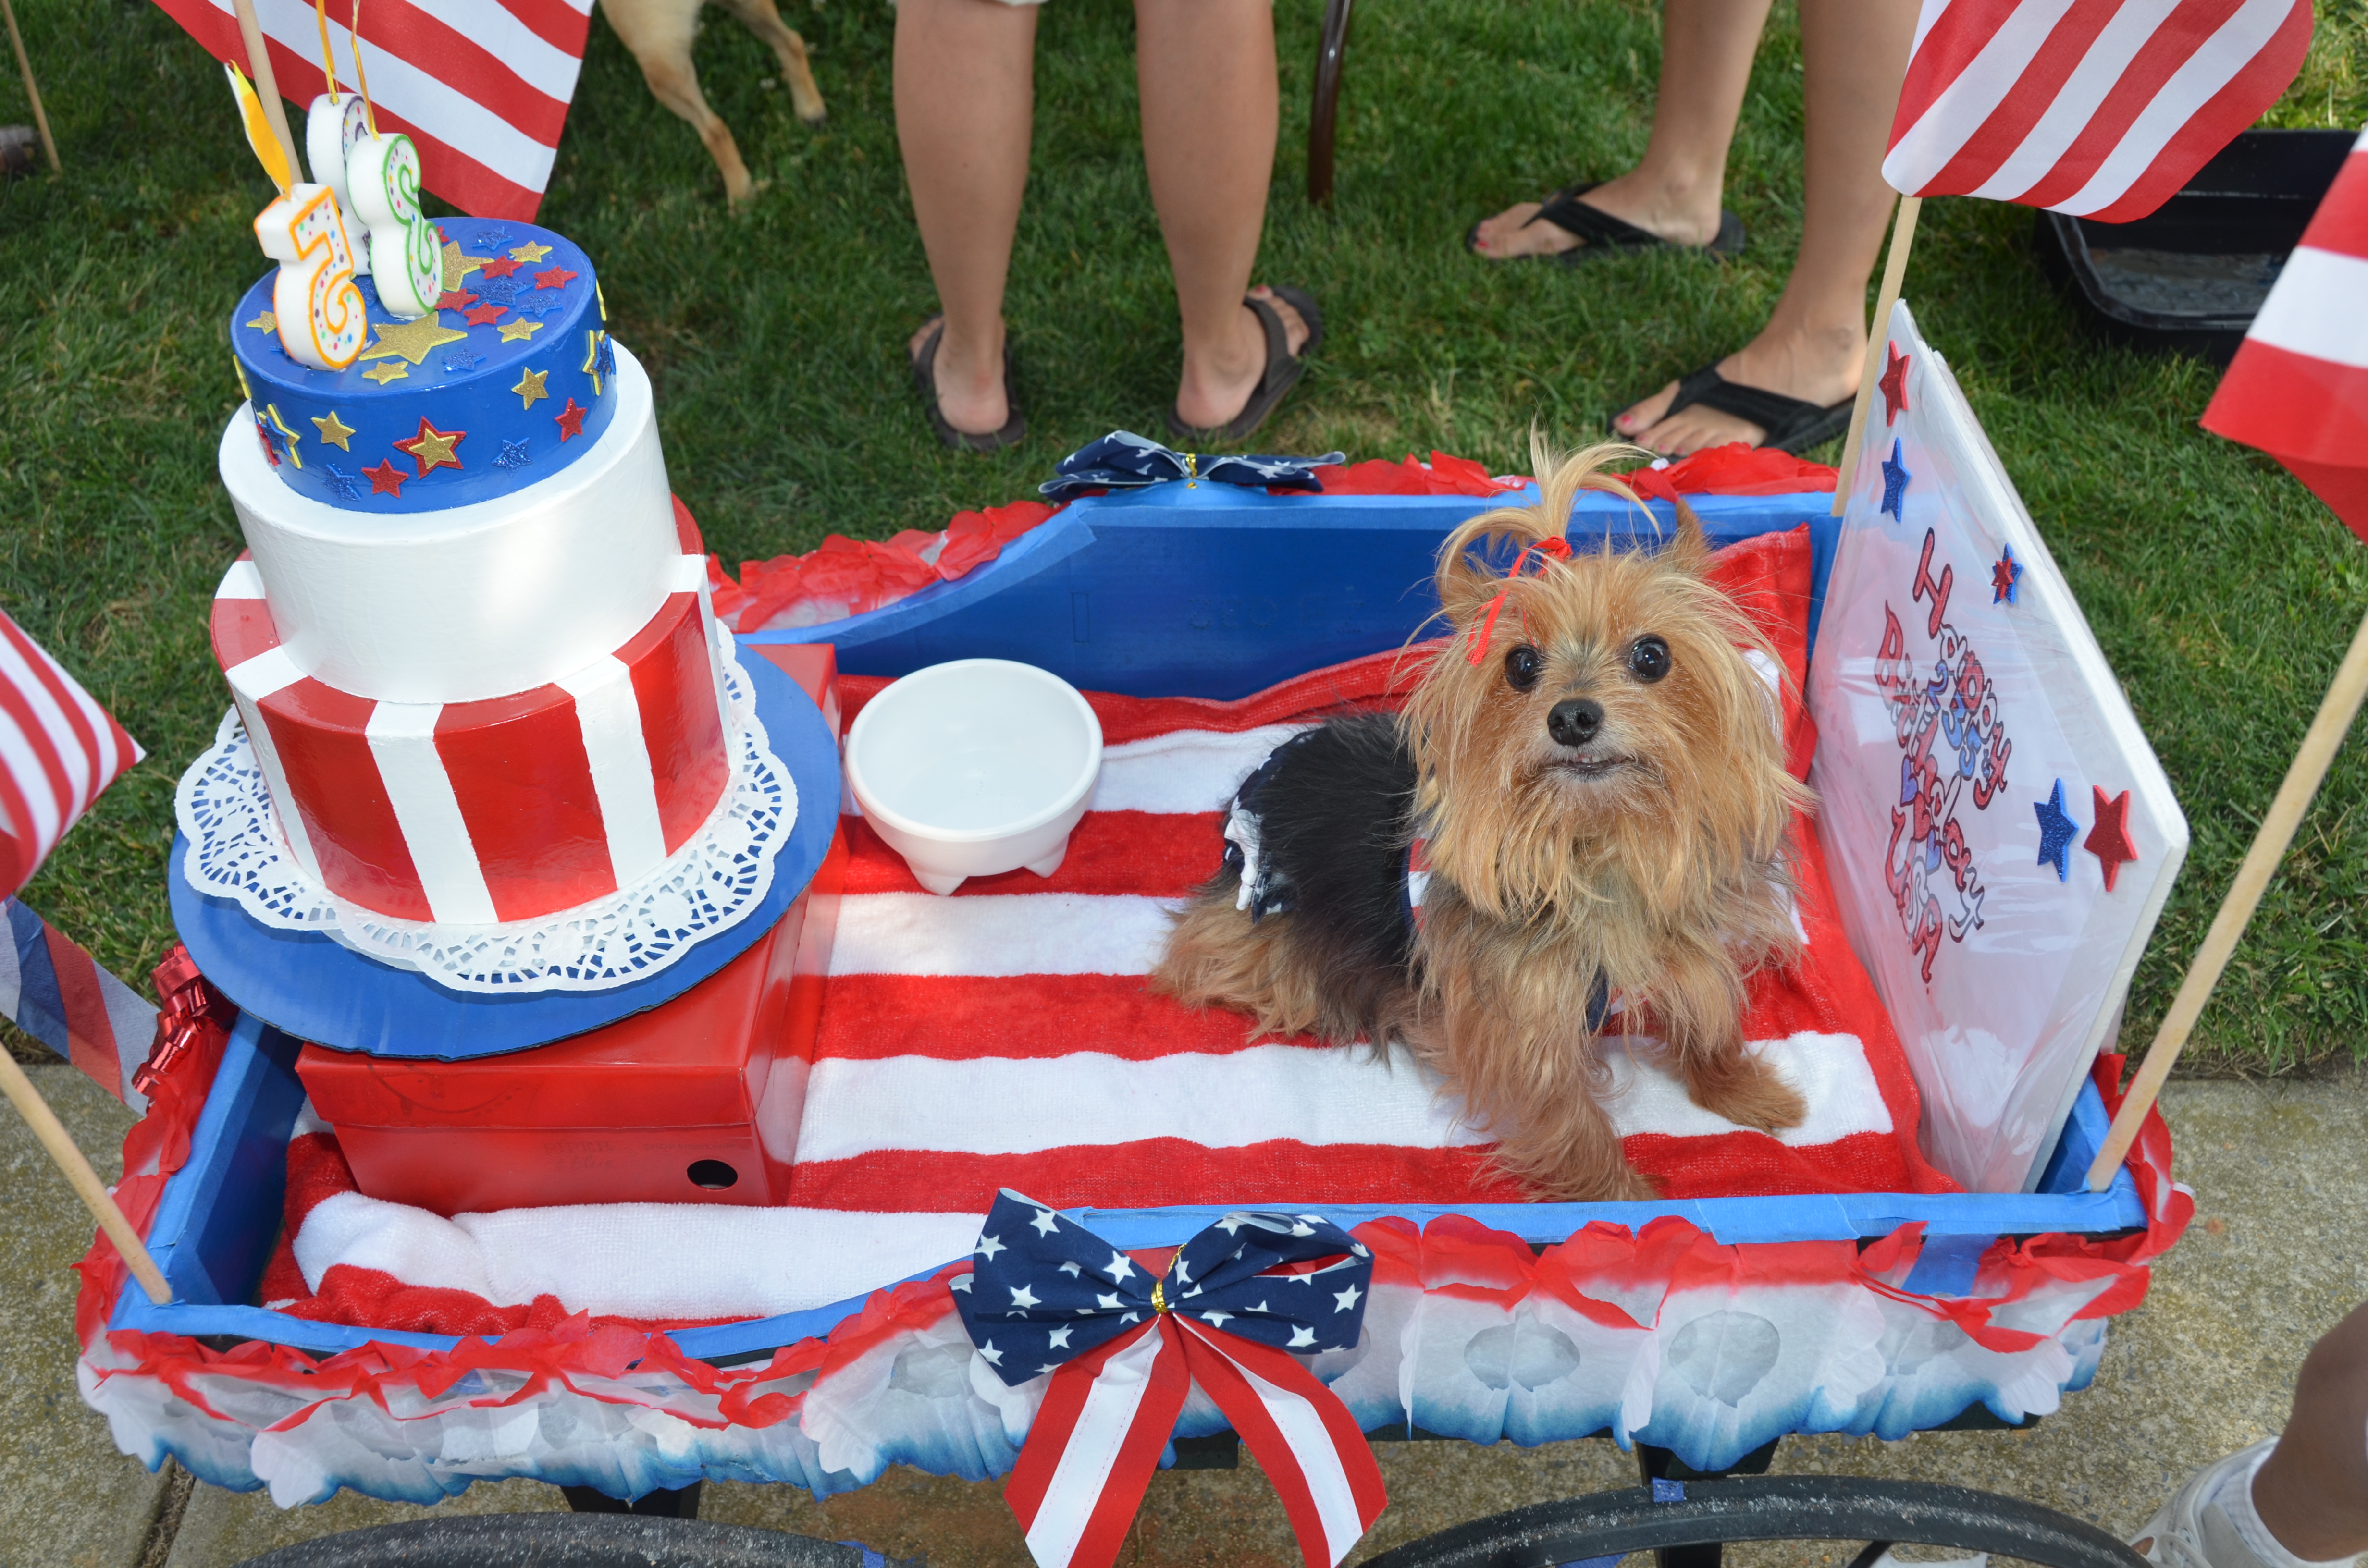 Patriotic Pooch Parade (Credit: Greater Wildwoods Tourism Authority)